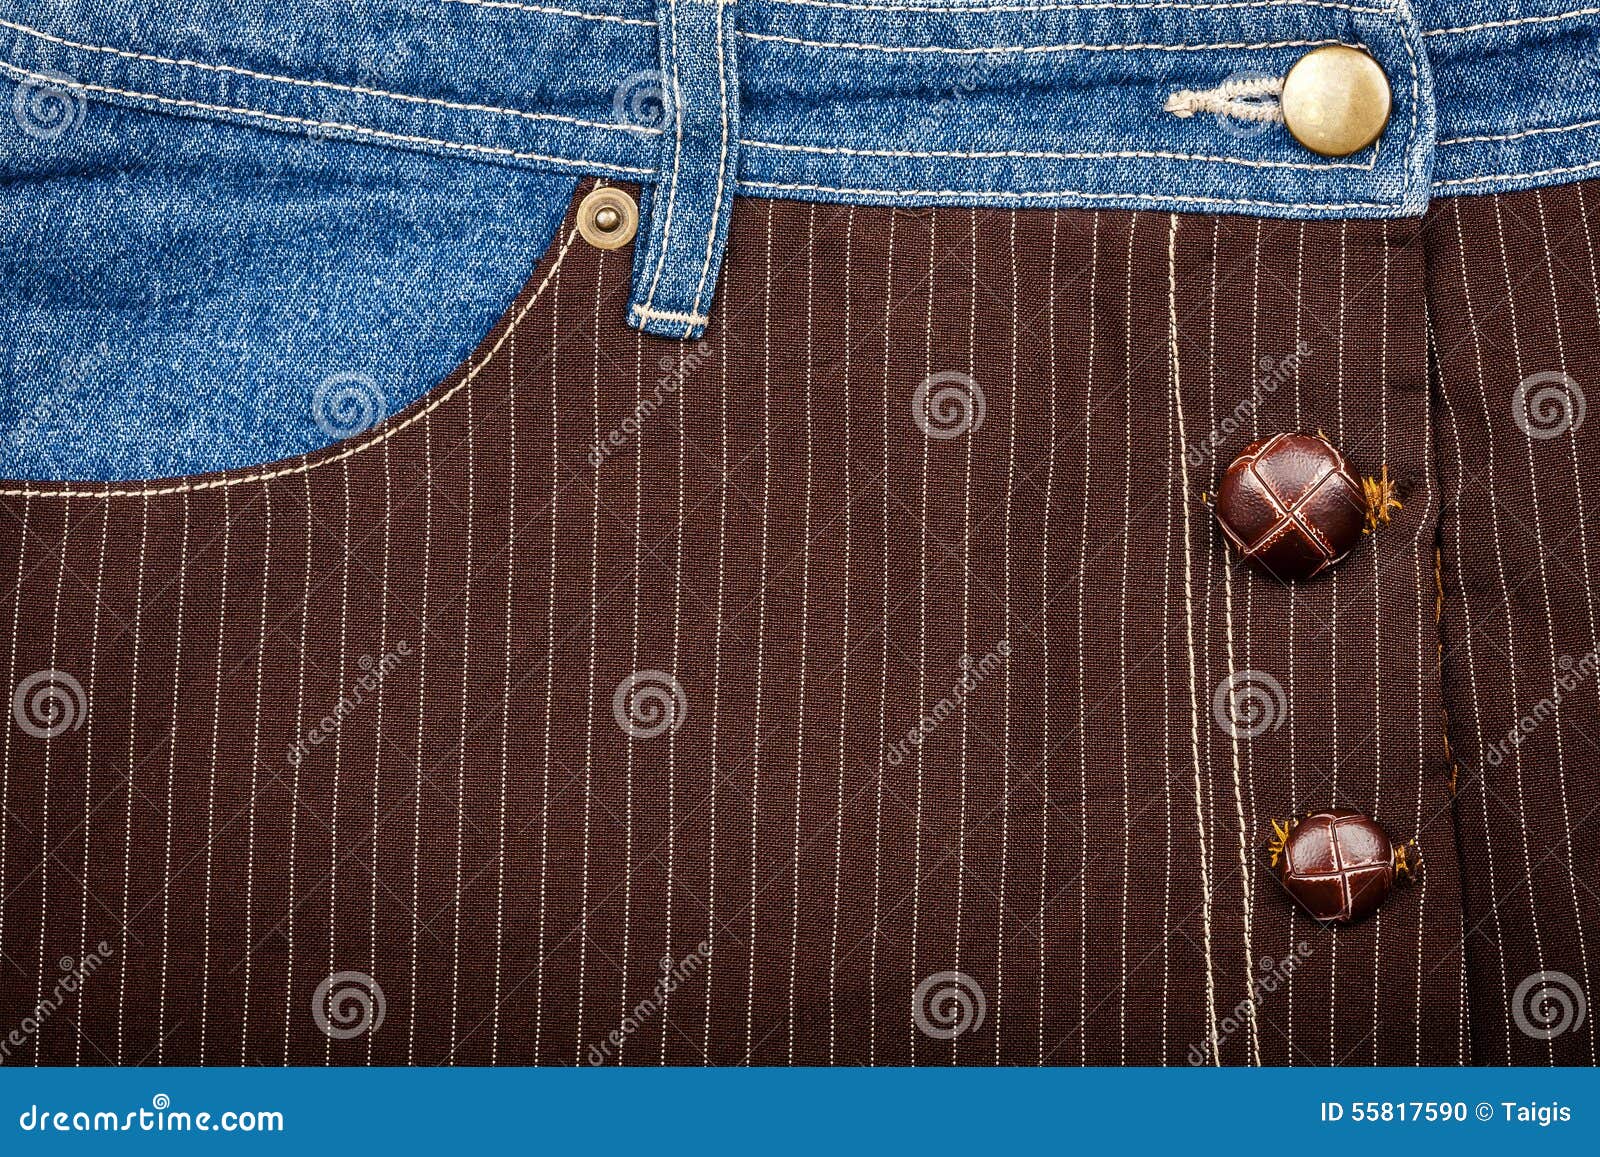 Jeans and Lined Brown Fabric Textures Stock Photo - Image of material ...